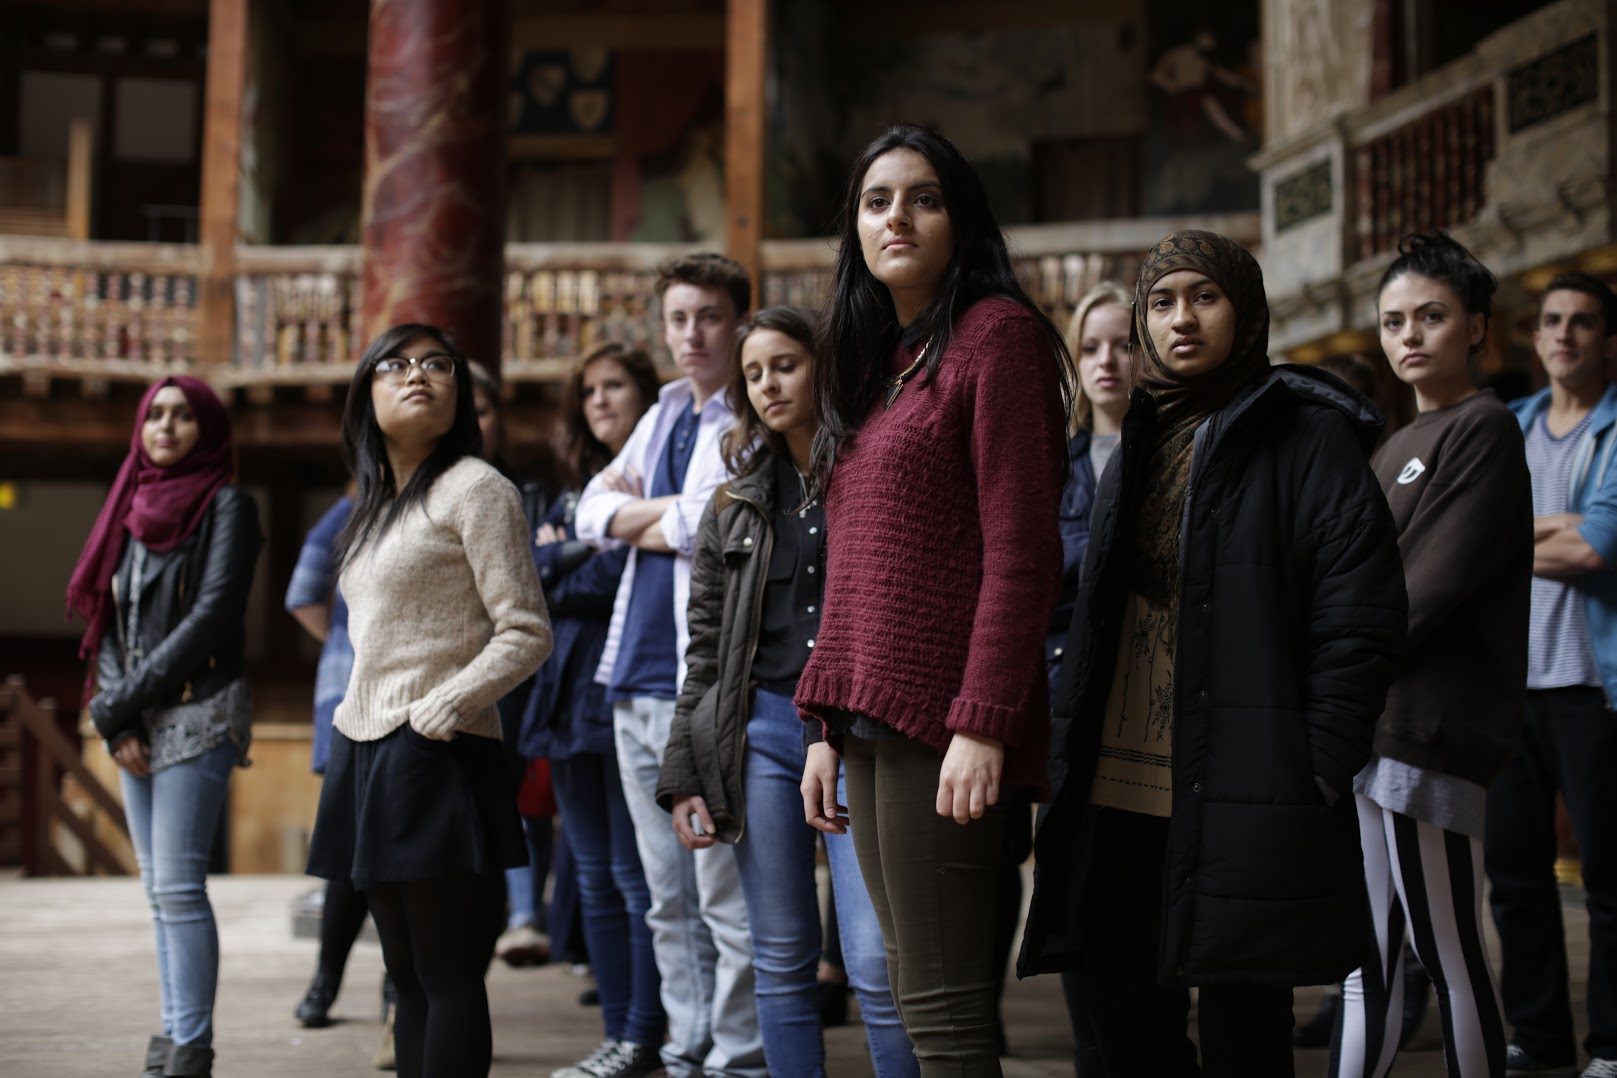 Student visiting the Shakespeare Globe Theatre in London